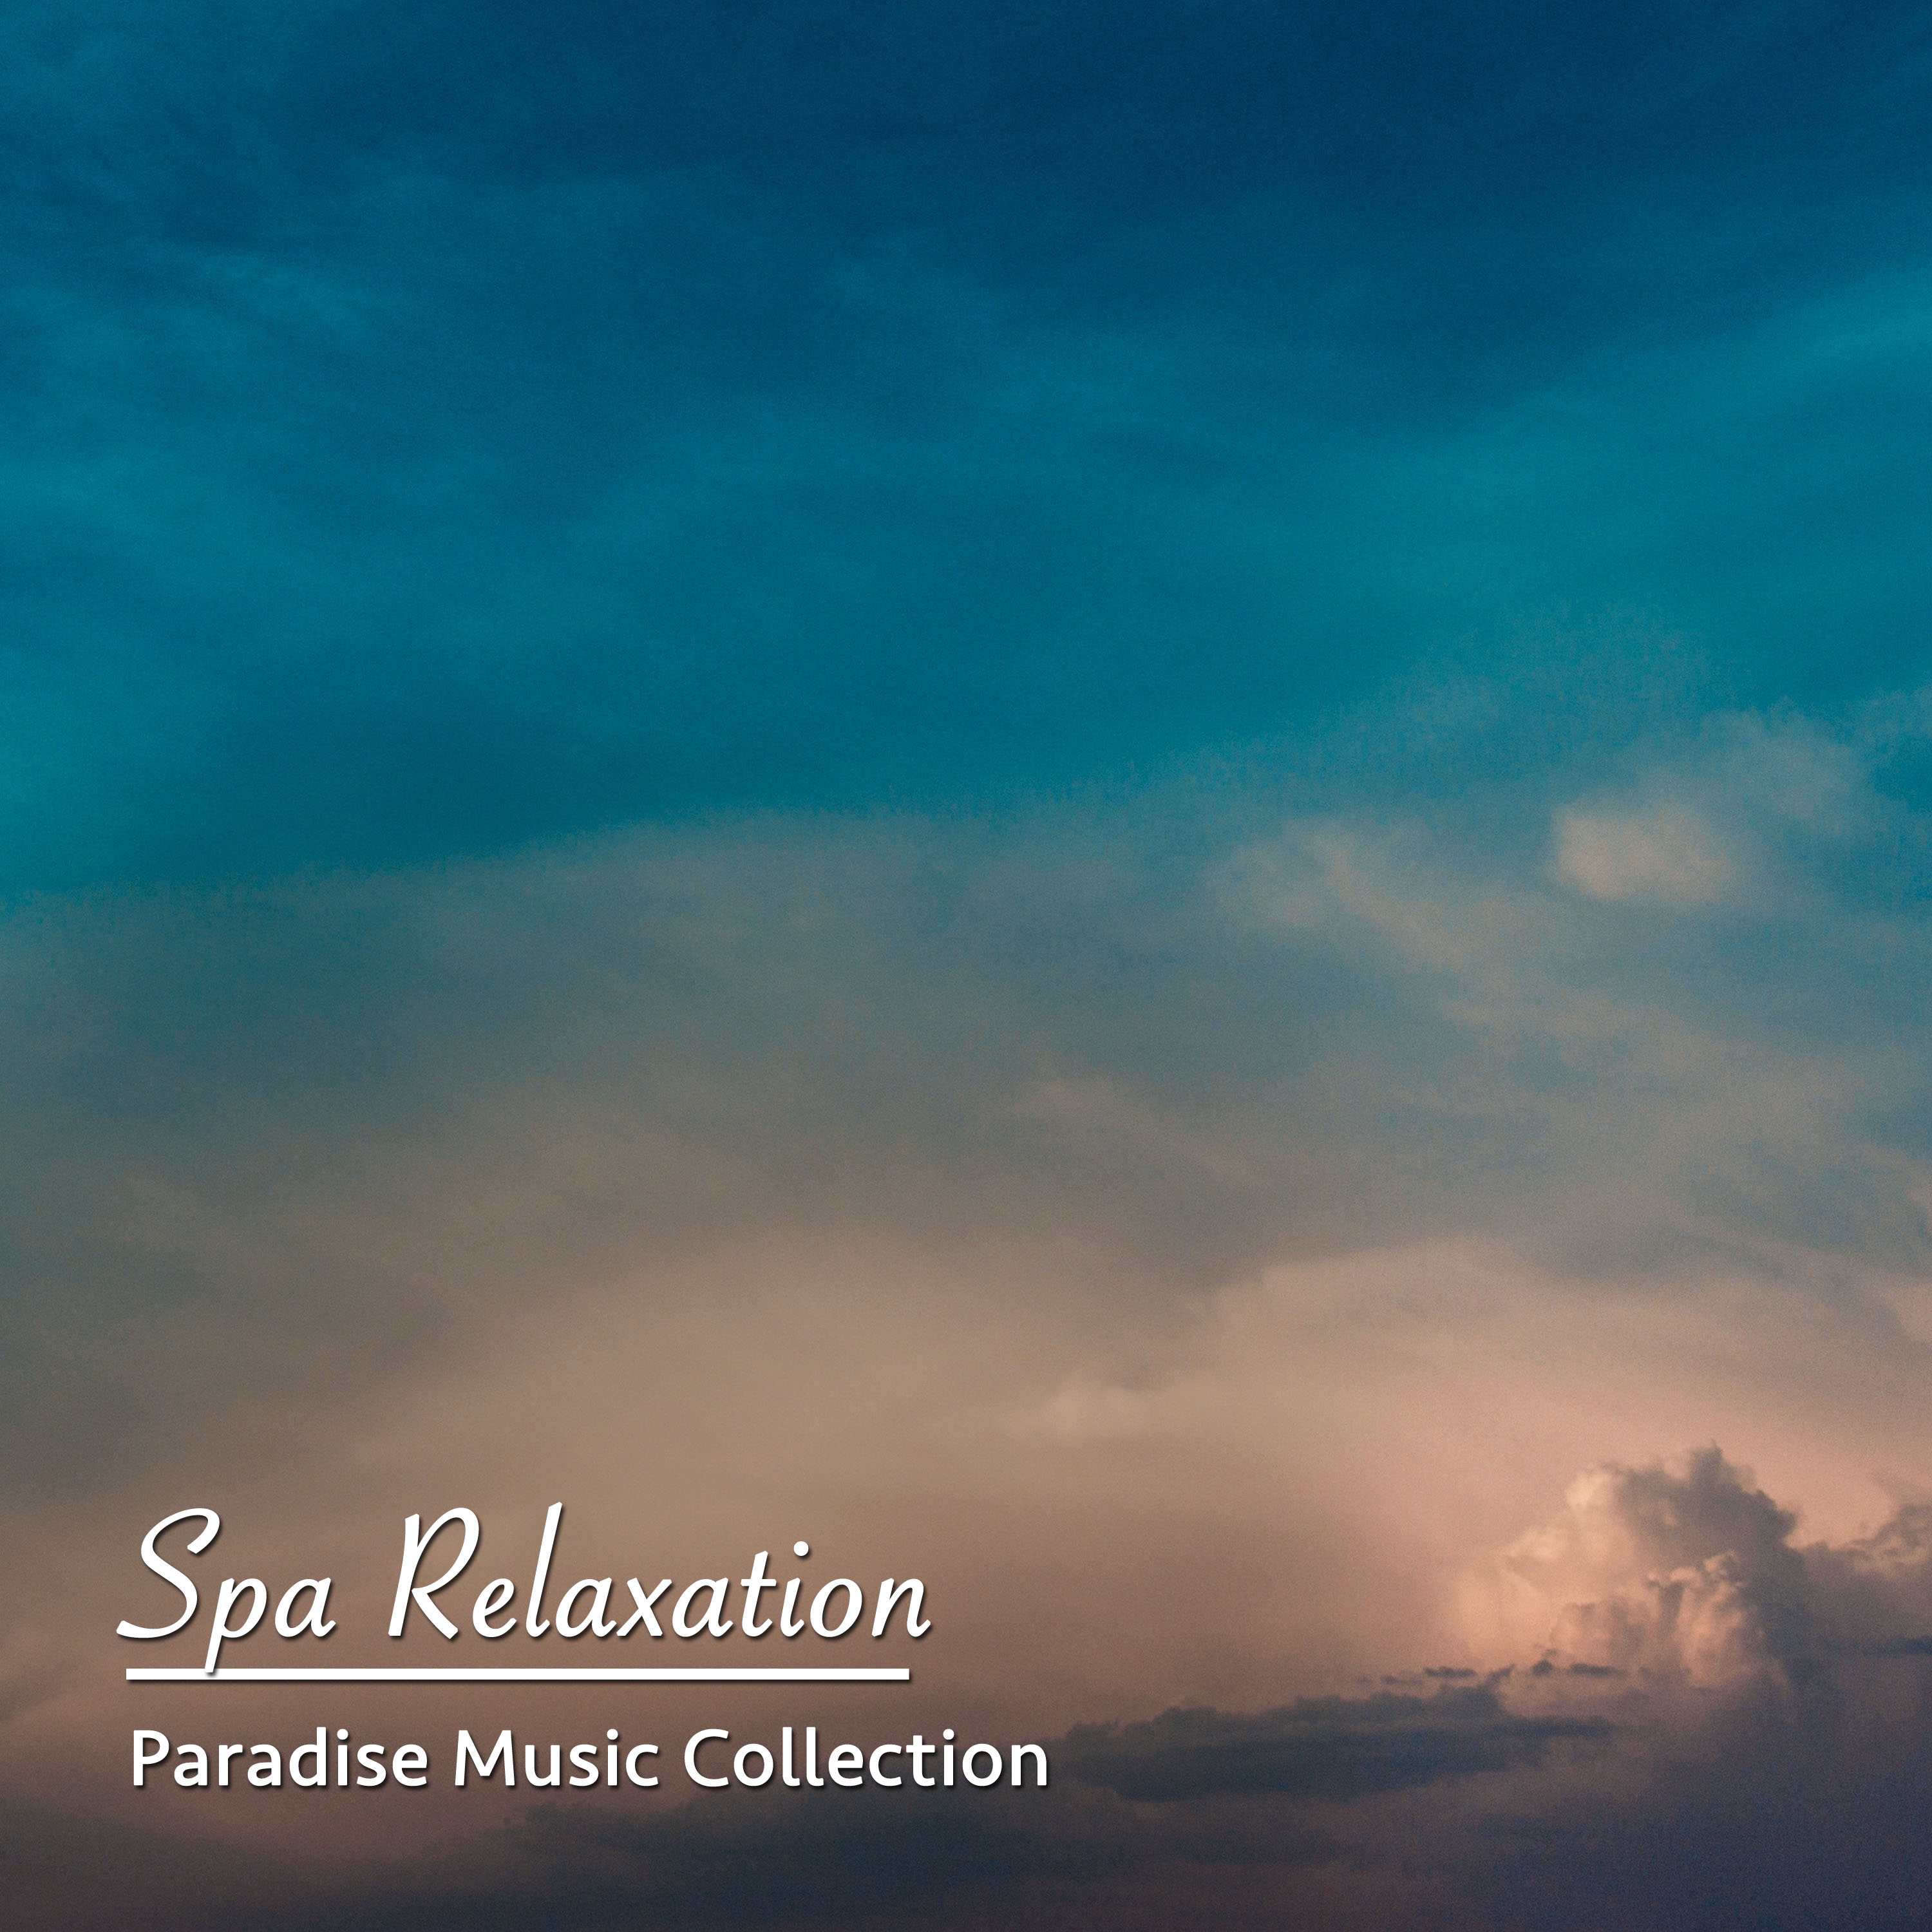 19 Spa Relaxation Paradise Music Collection